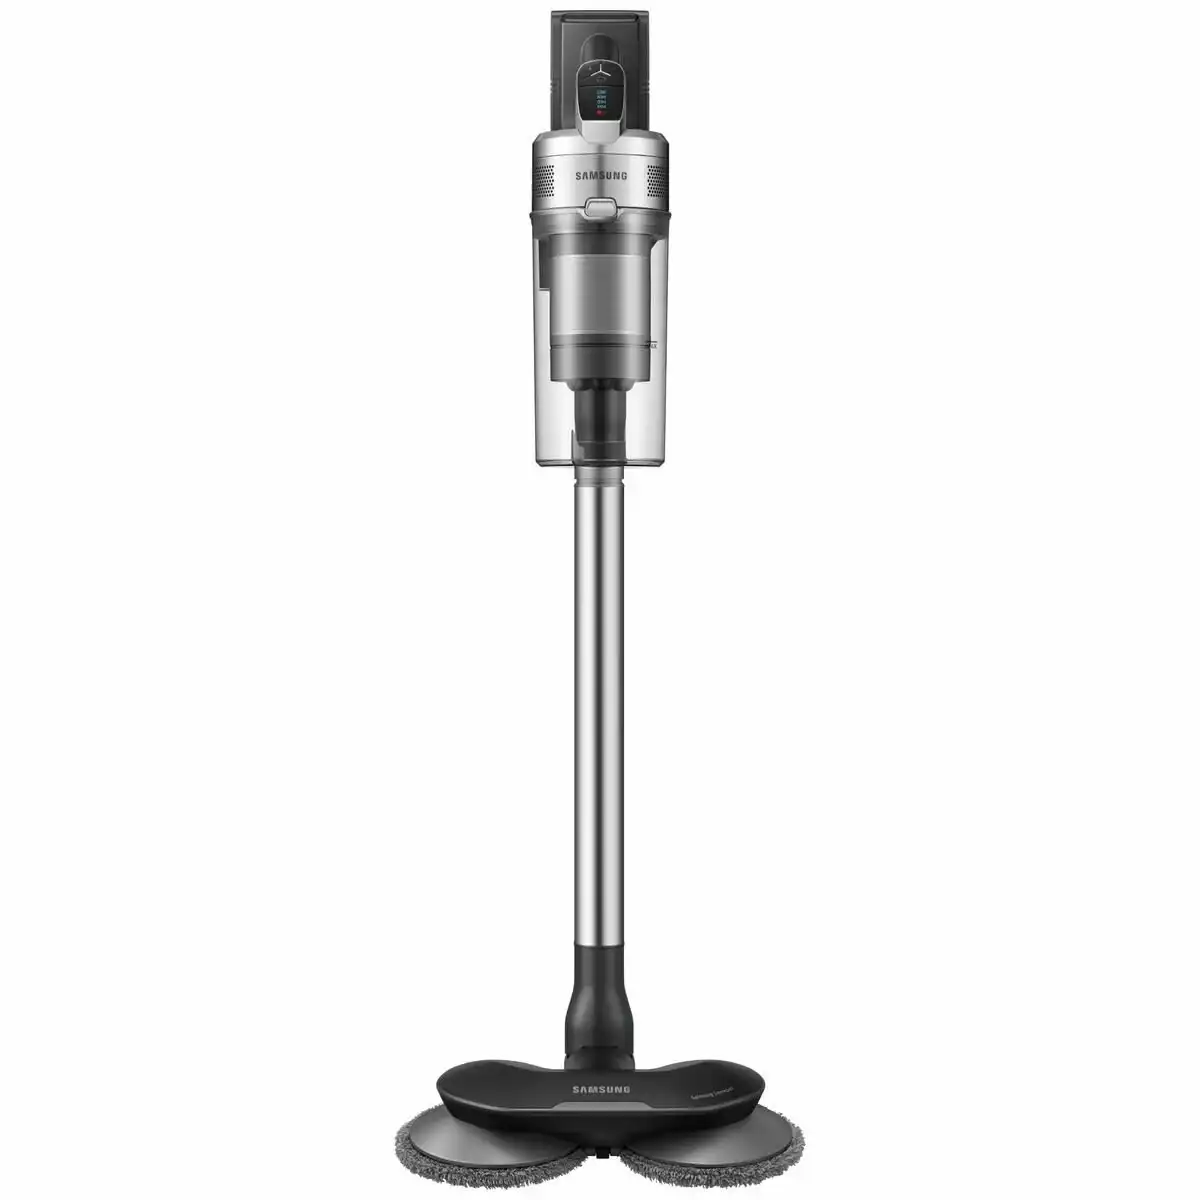 Samsung Jet VS90 Stick Vac Turbo with Spinning Sweeper Tool